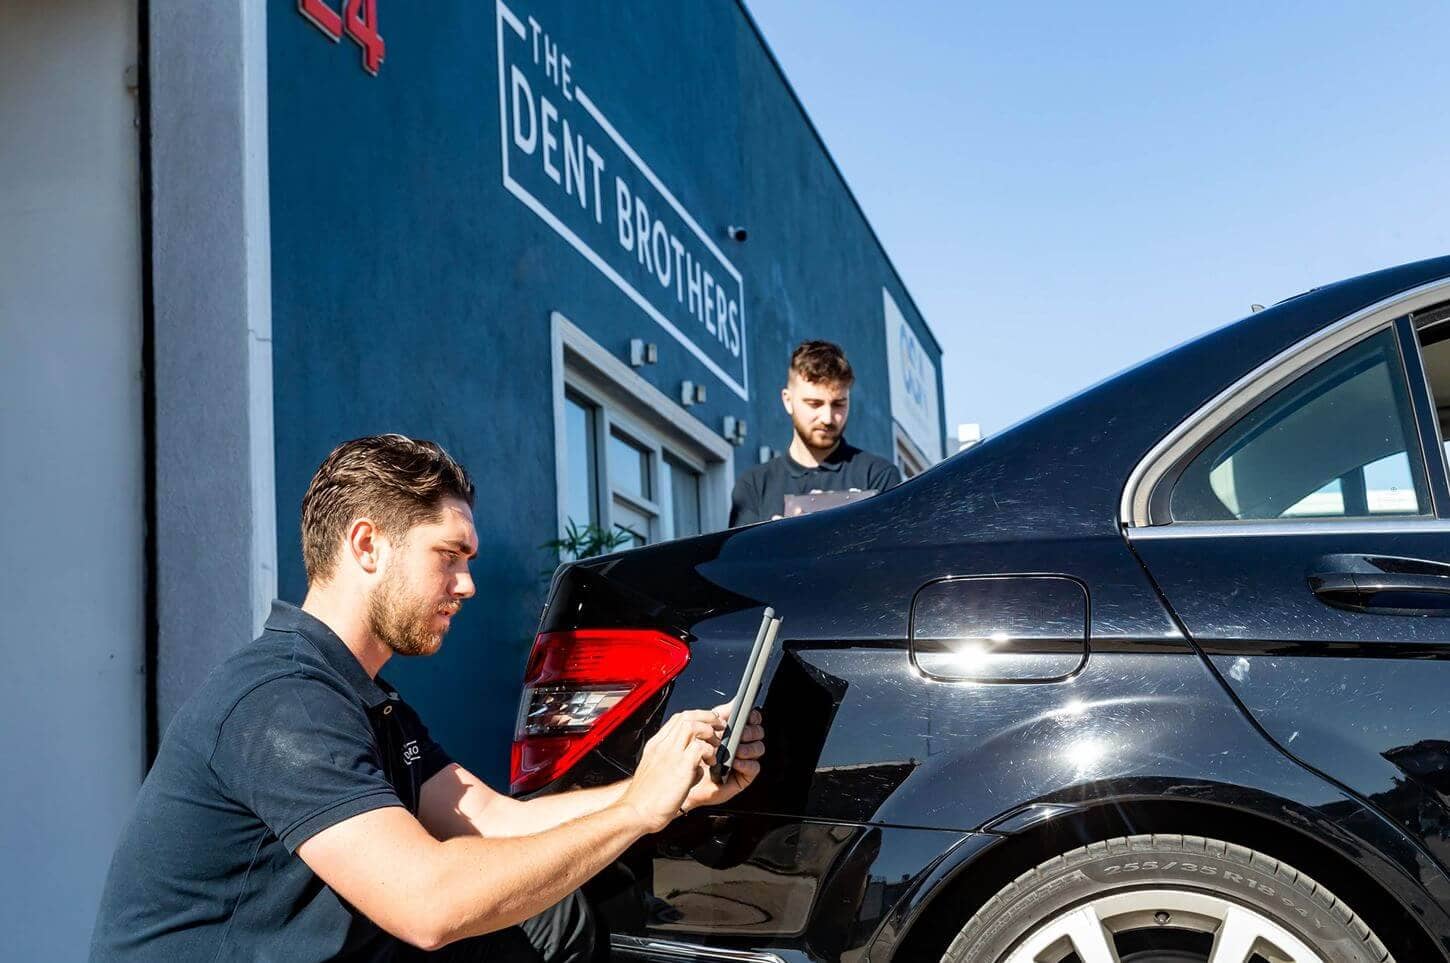 The Dent Brothers | Paintless Dent Removal in Canberra